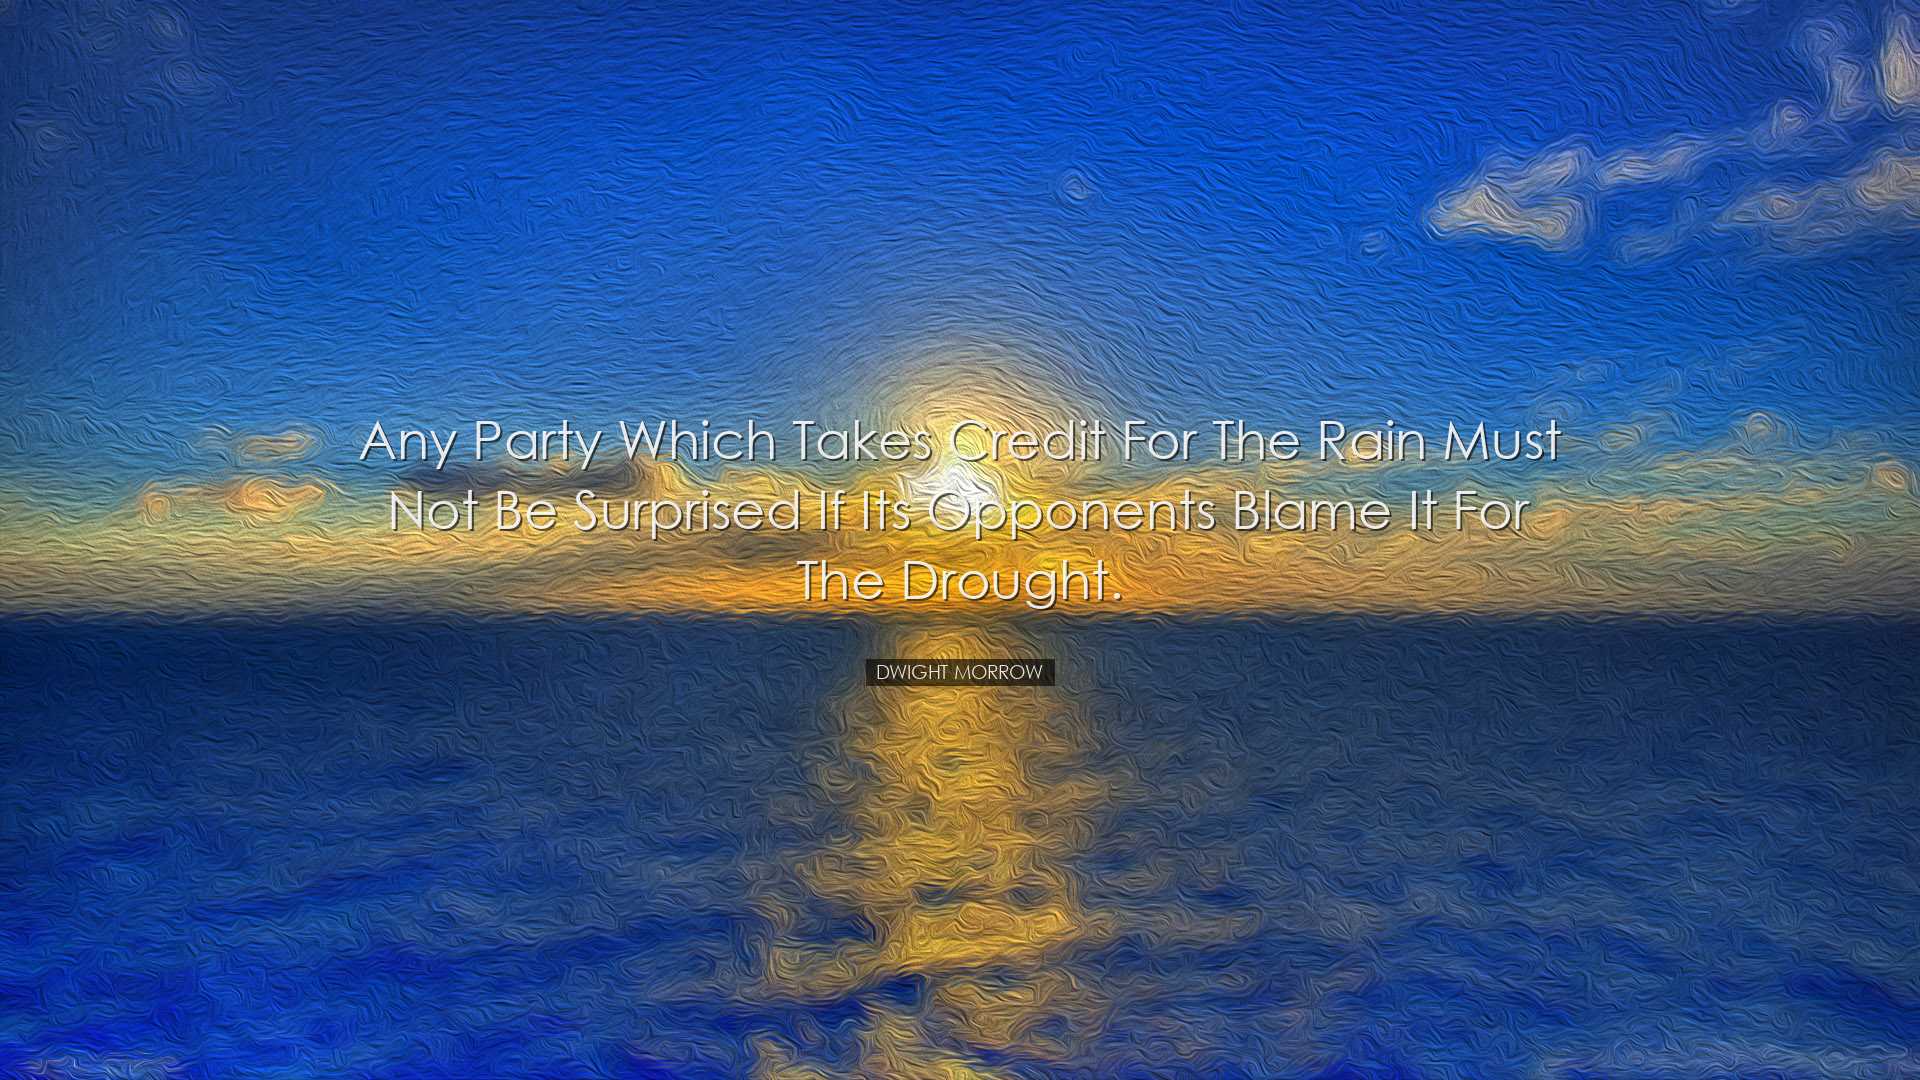 Any party which takes credit for the rain must not be surprised if